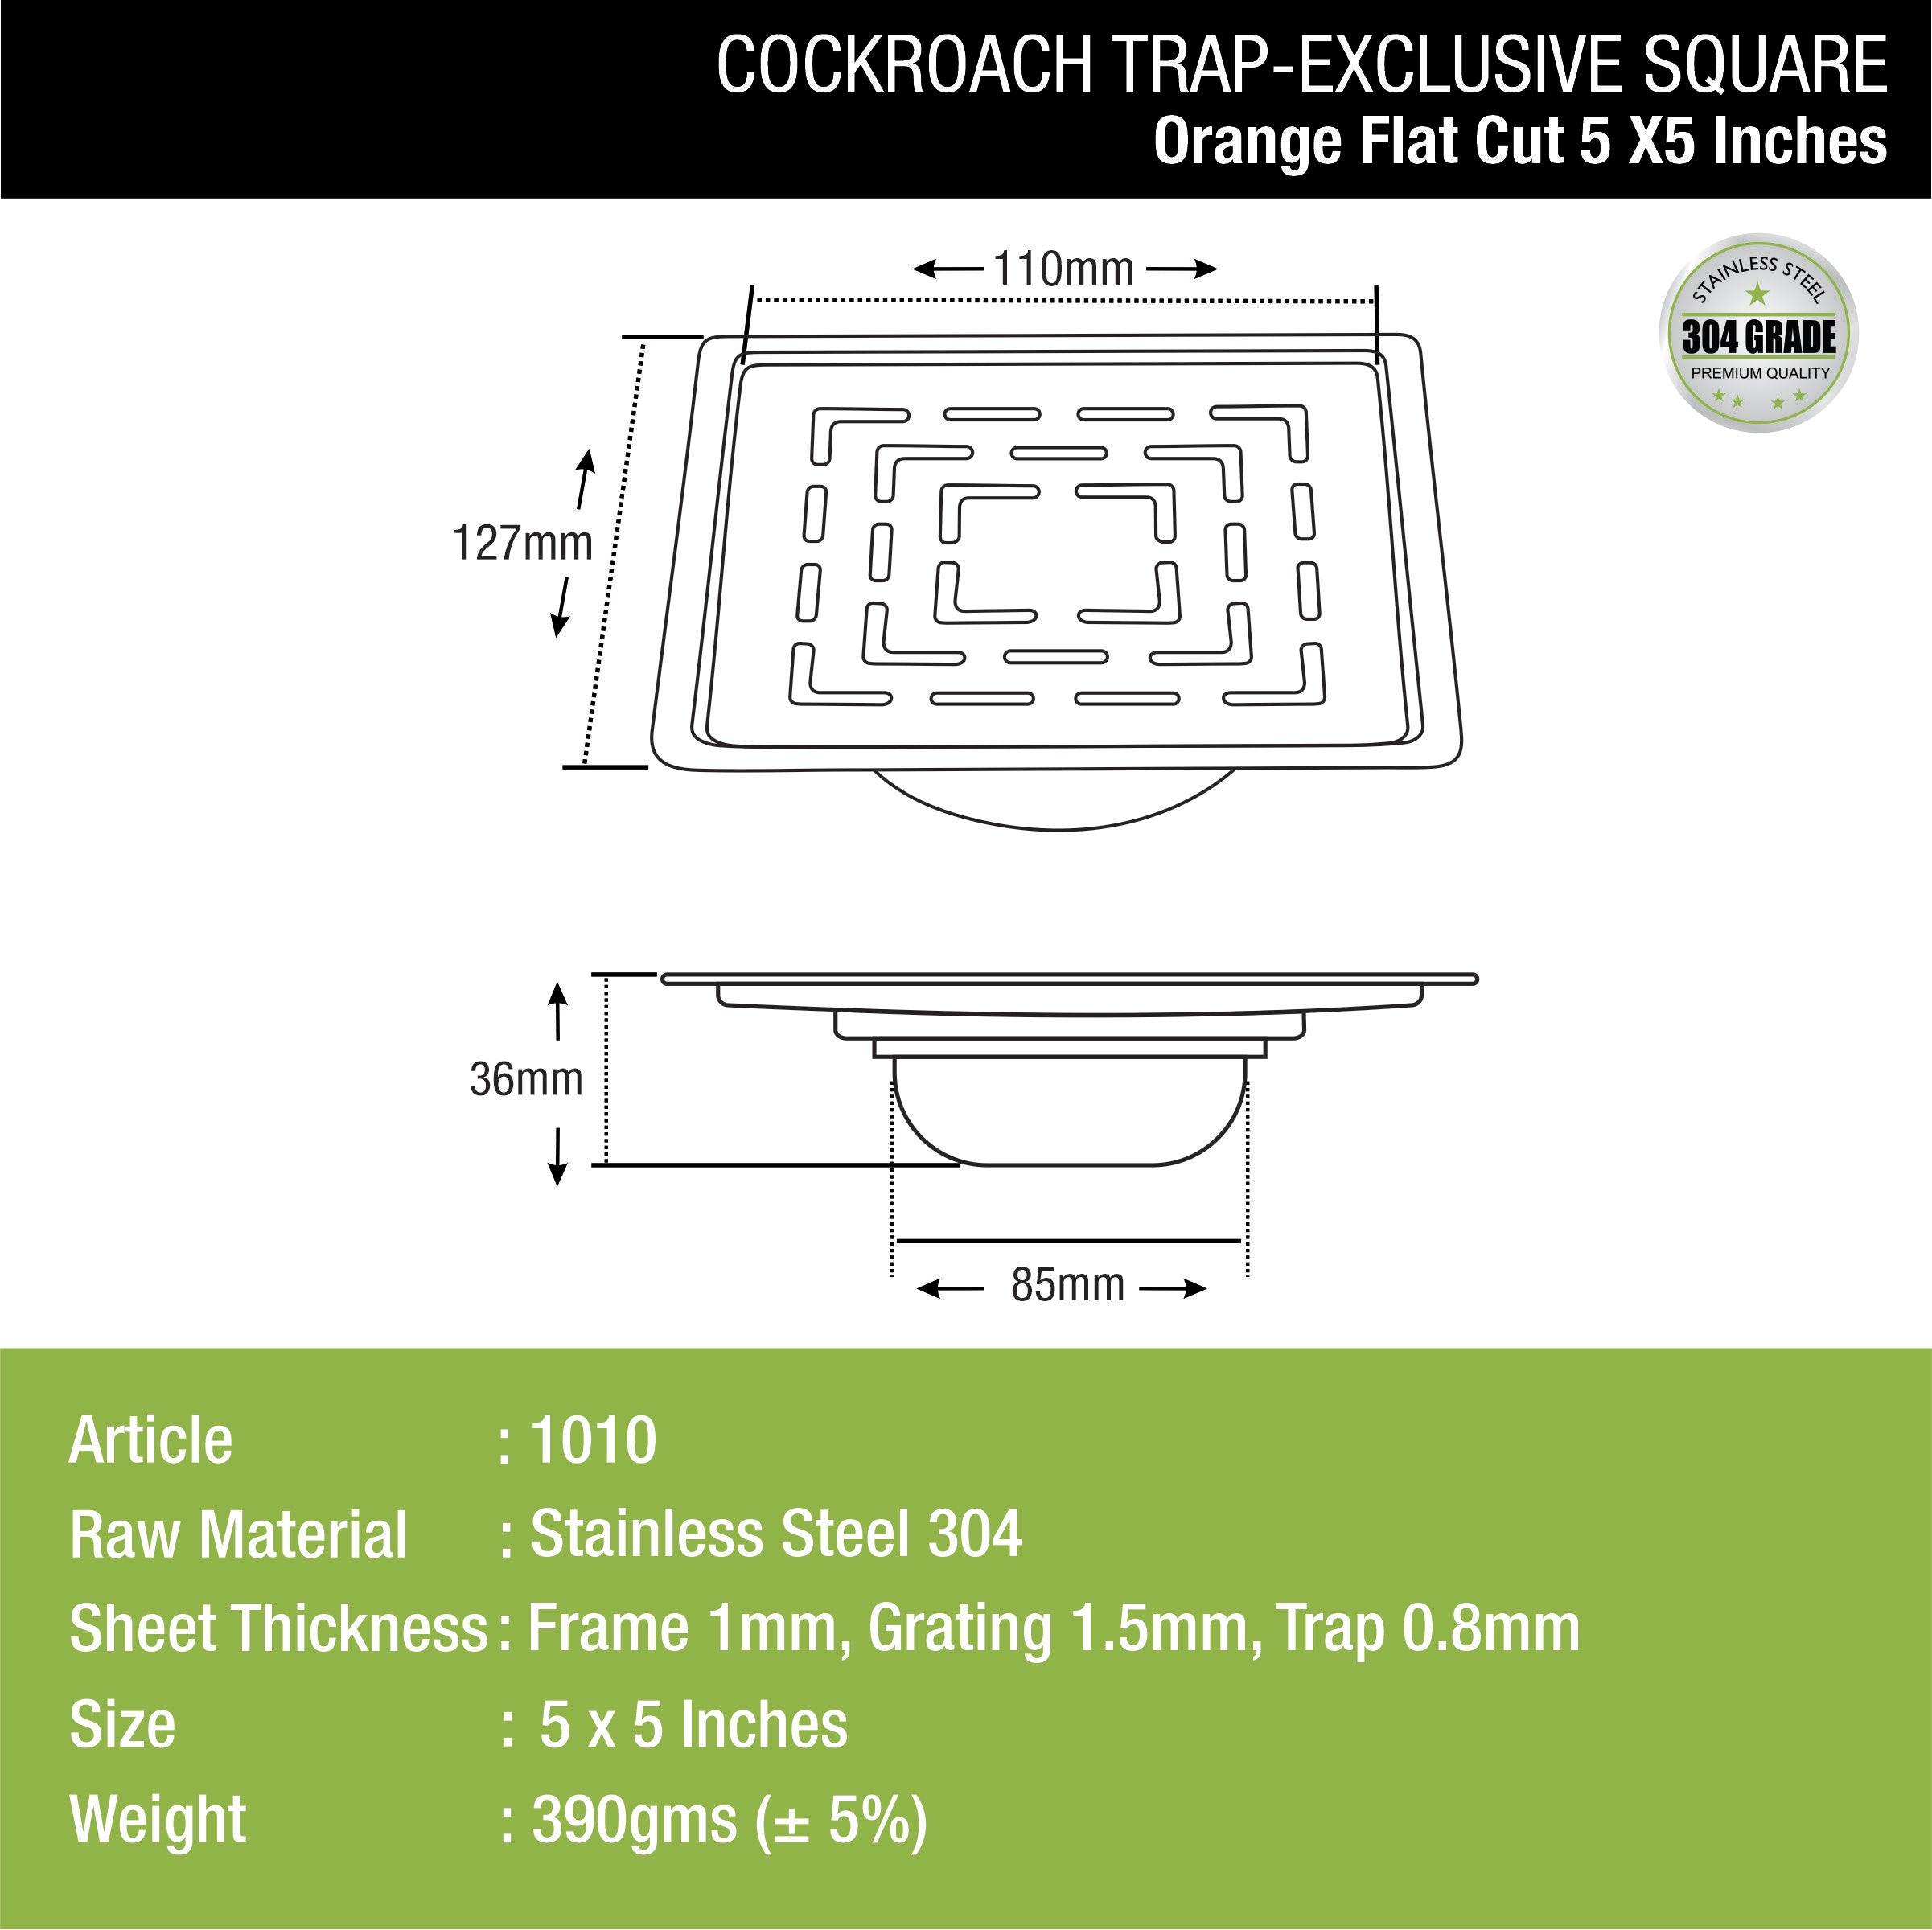 Orange Exclusive Square Flat Cut Floor Drain (5 x 5 Inches) with Cockroach Trap dimensions and sizes